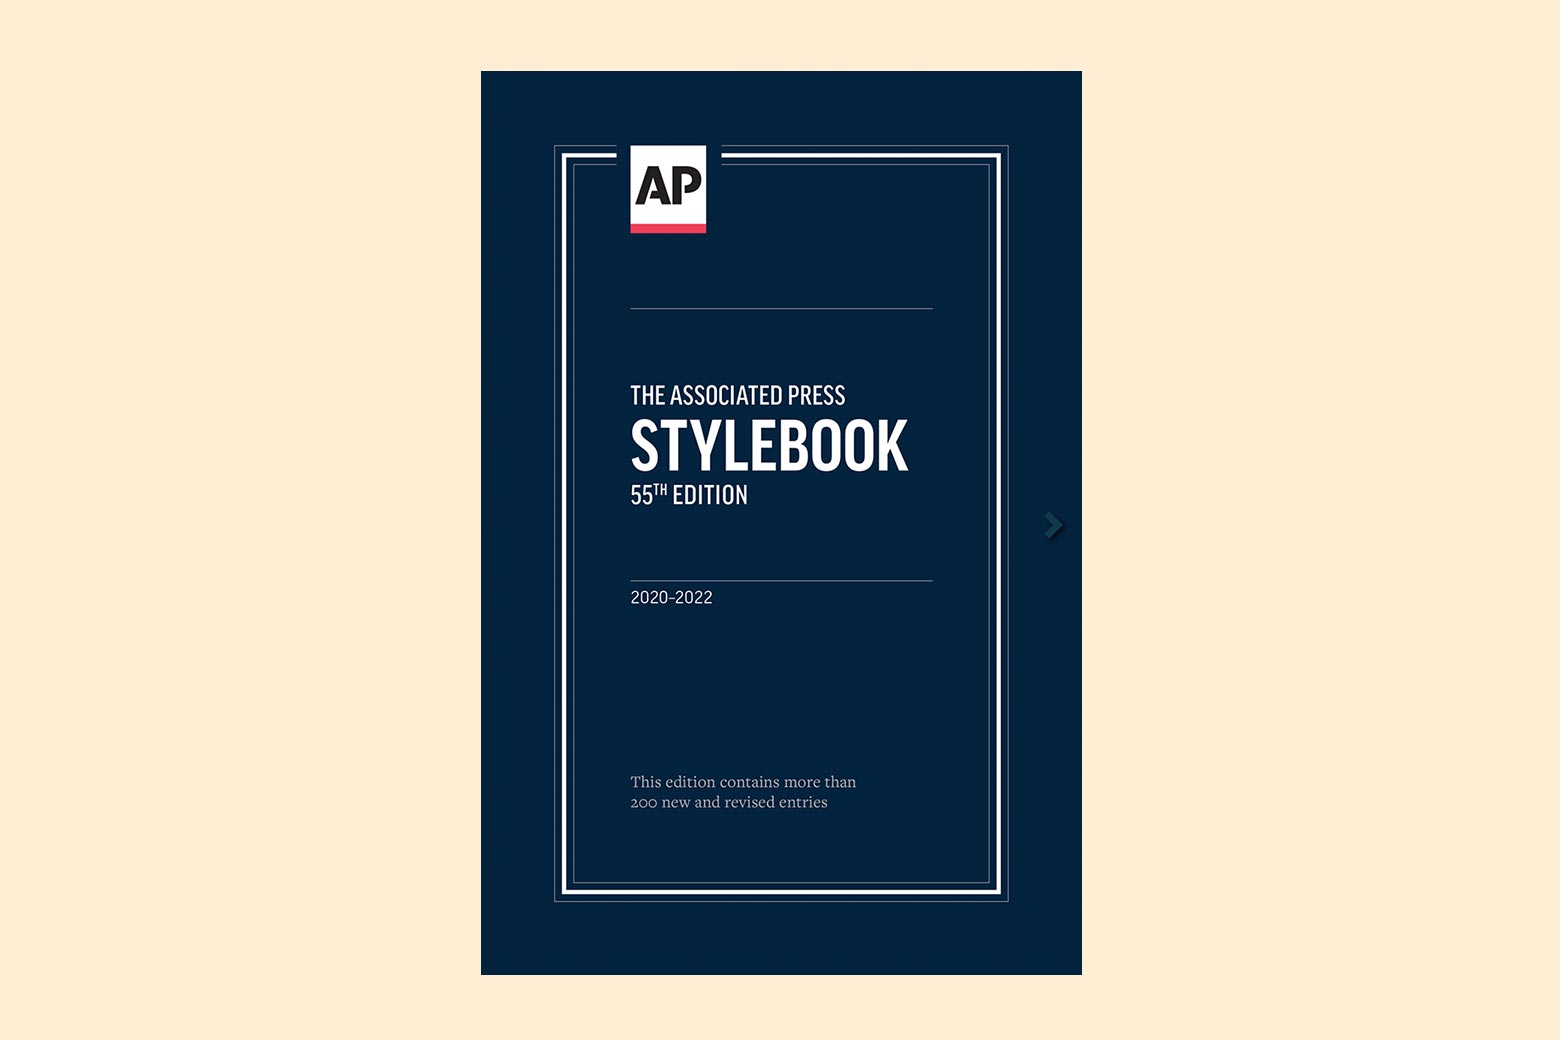 The cover of the Associated Press' new Stylebook